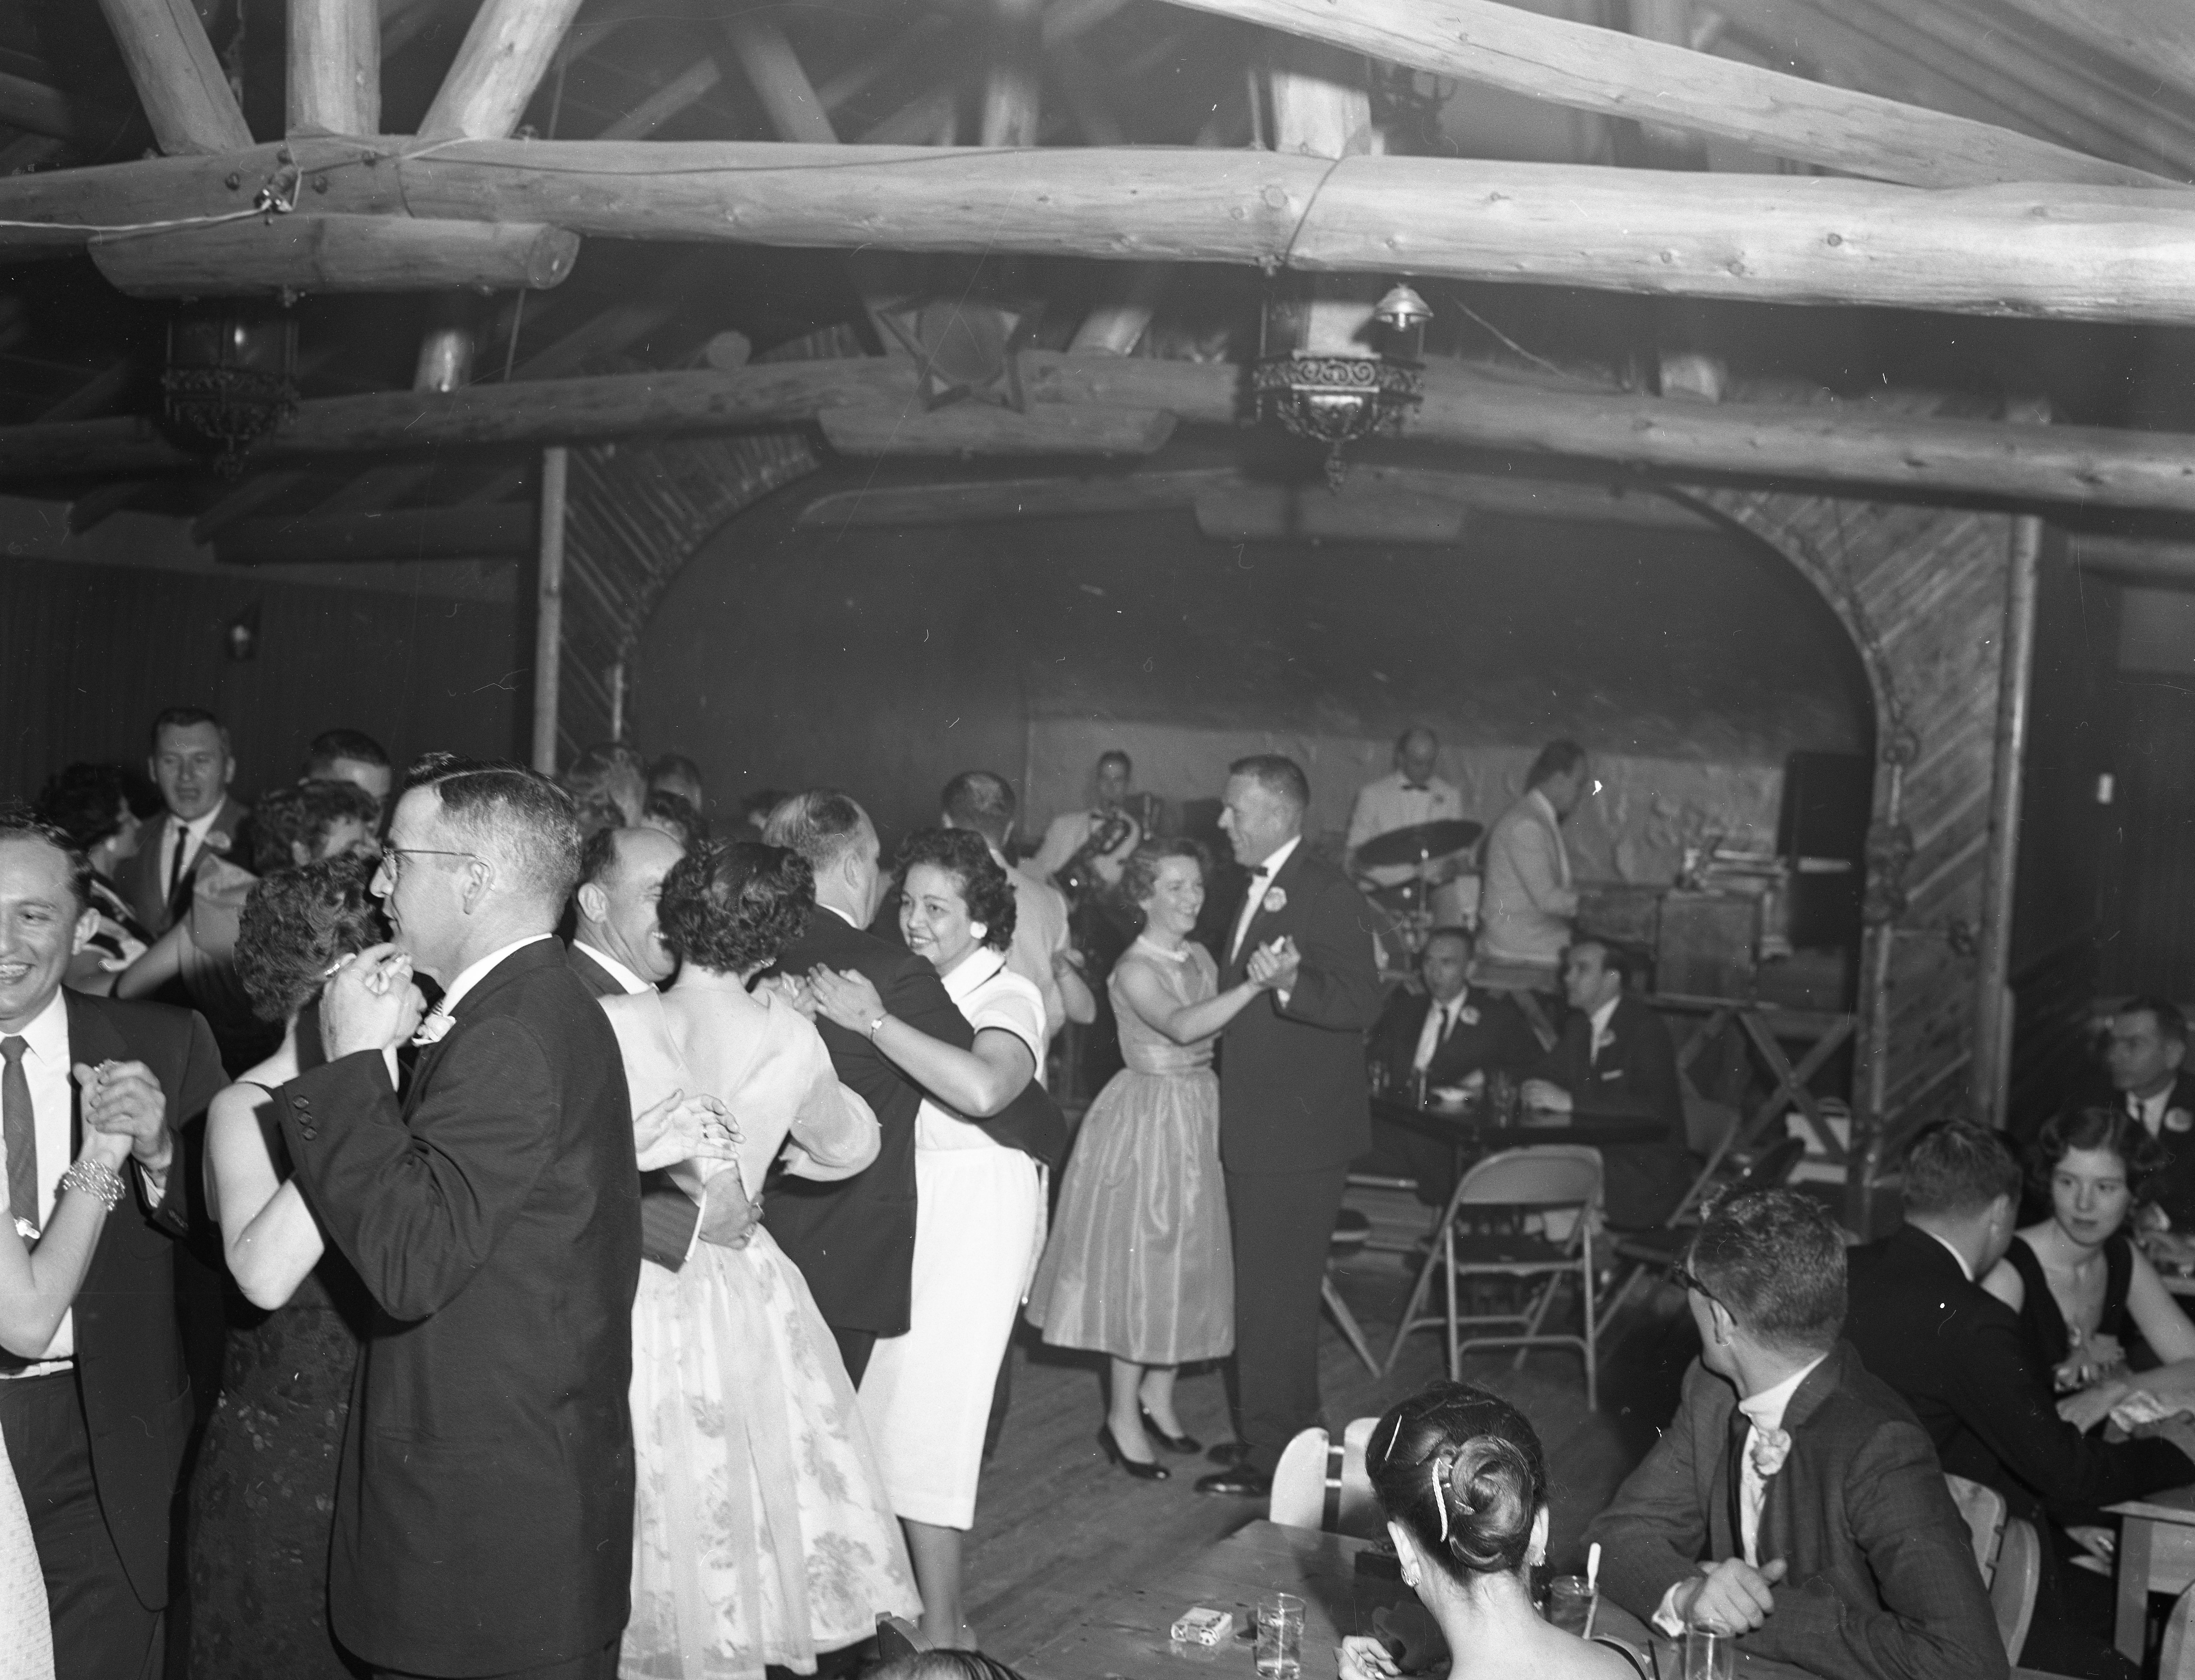 Convair employees and others dancing at the event.